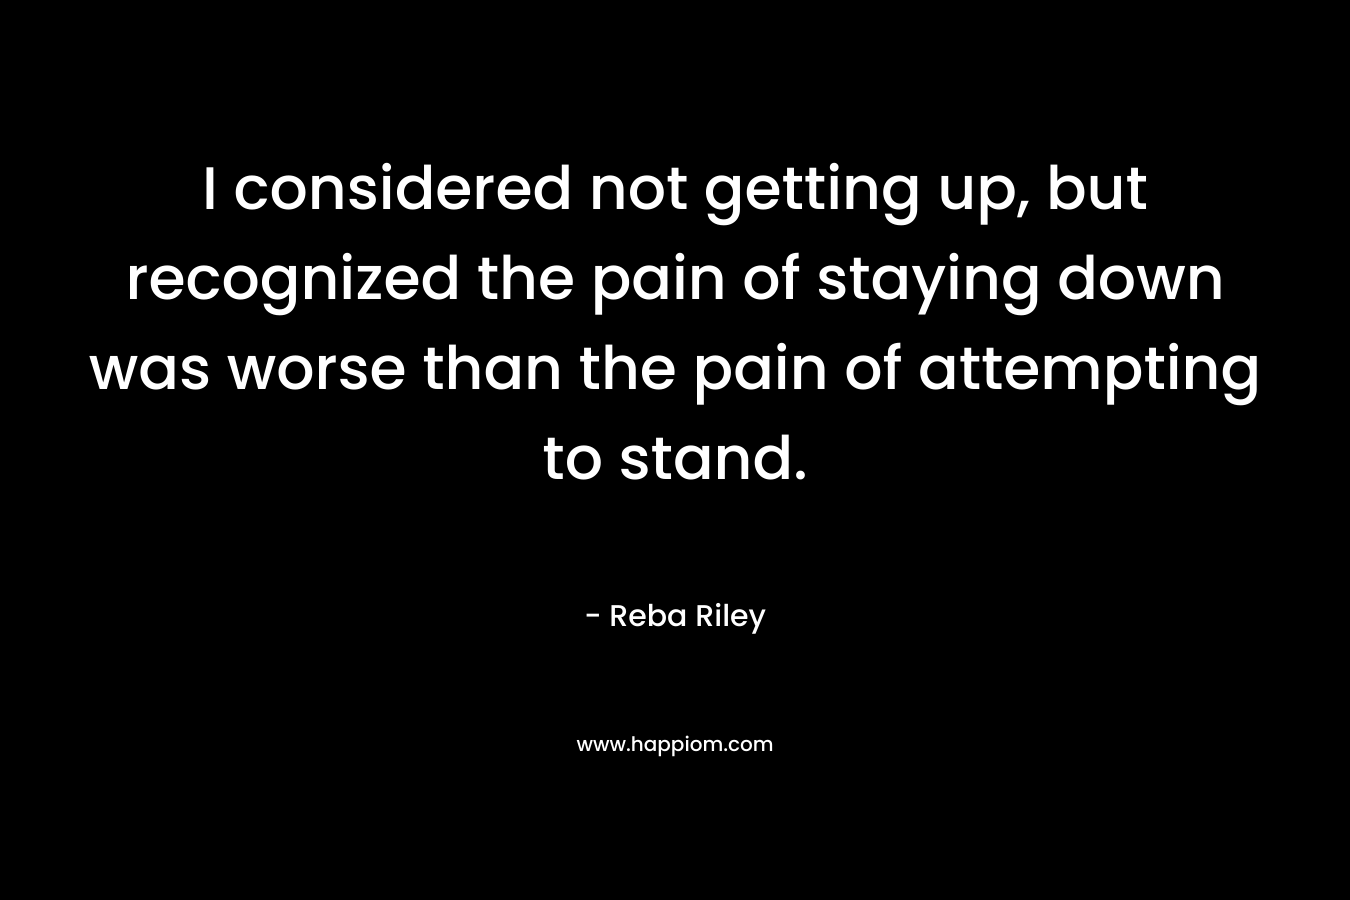 I considered not getting up, but recognized the pain of staying down was worse than the pain of attempting to stand. – Reba Riley